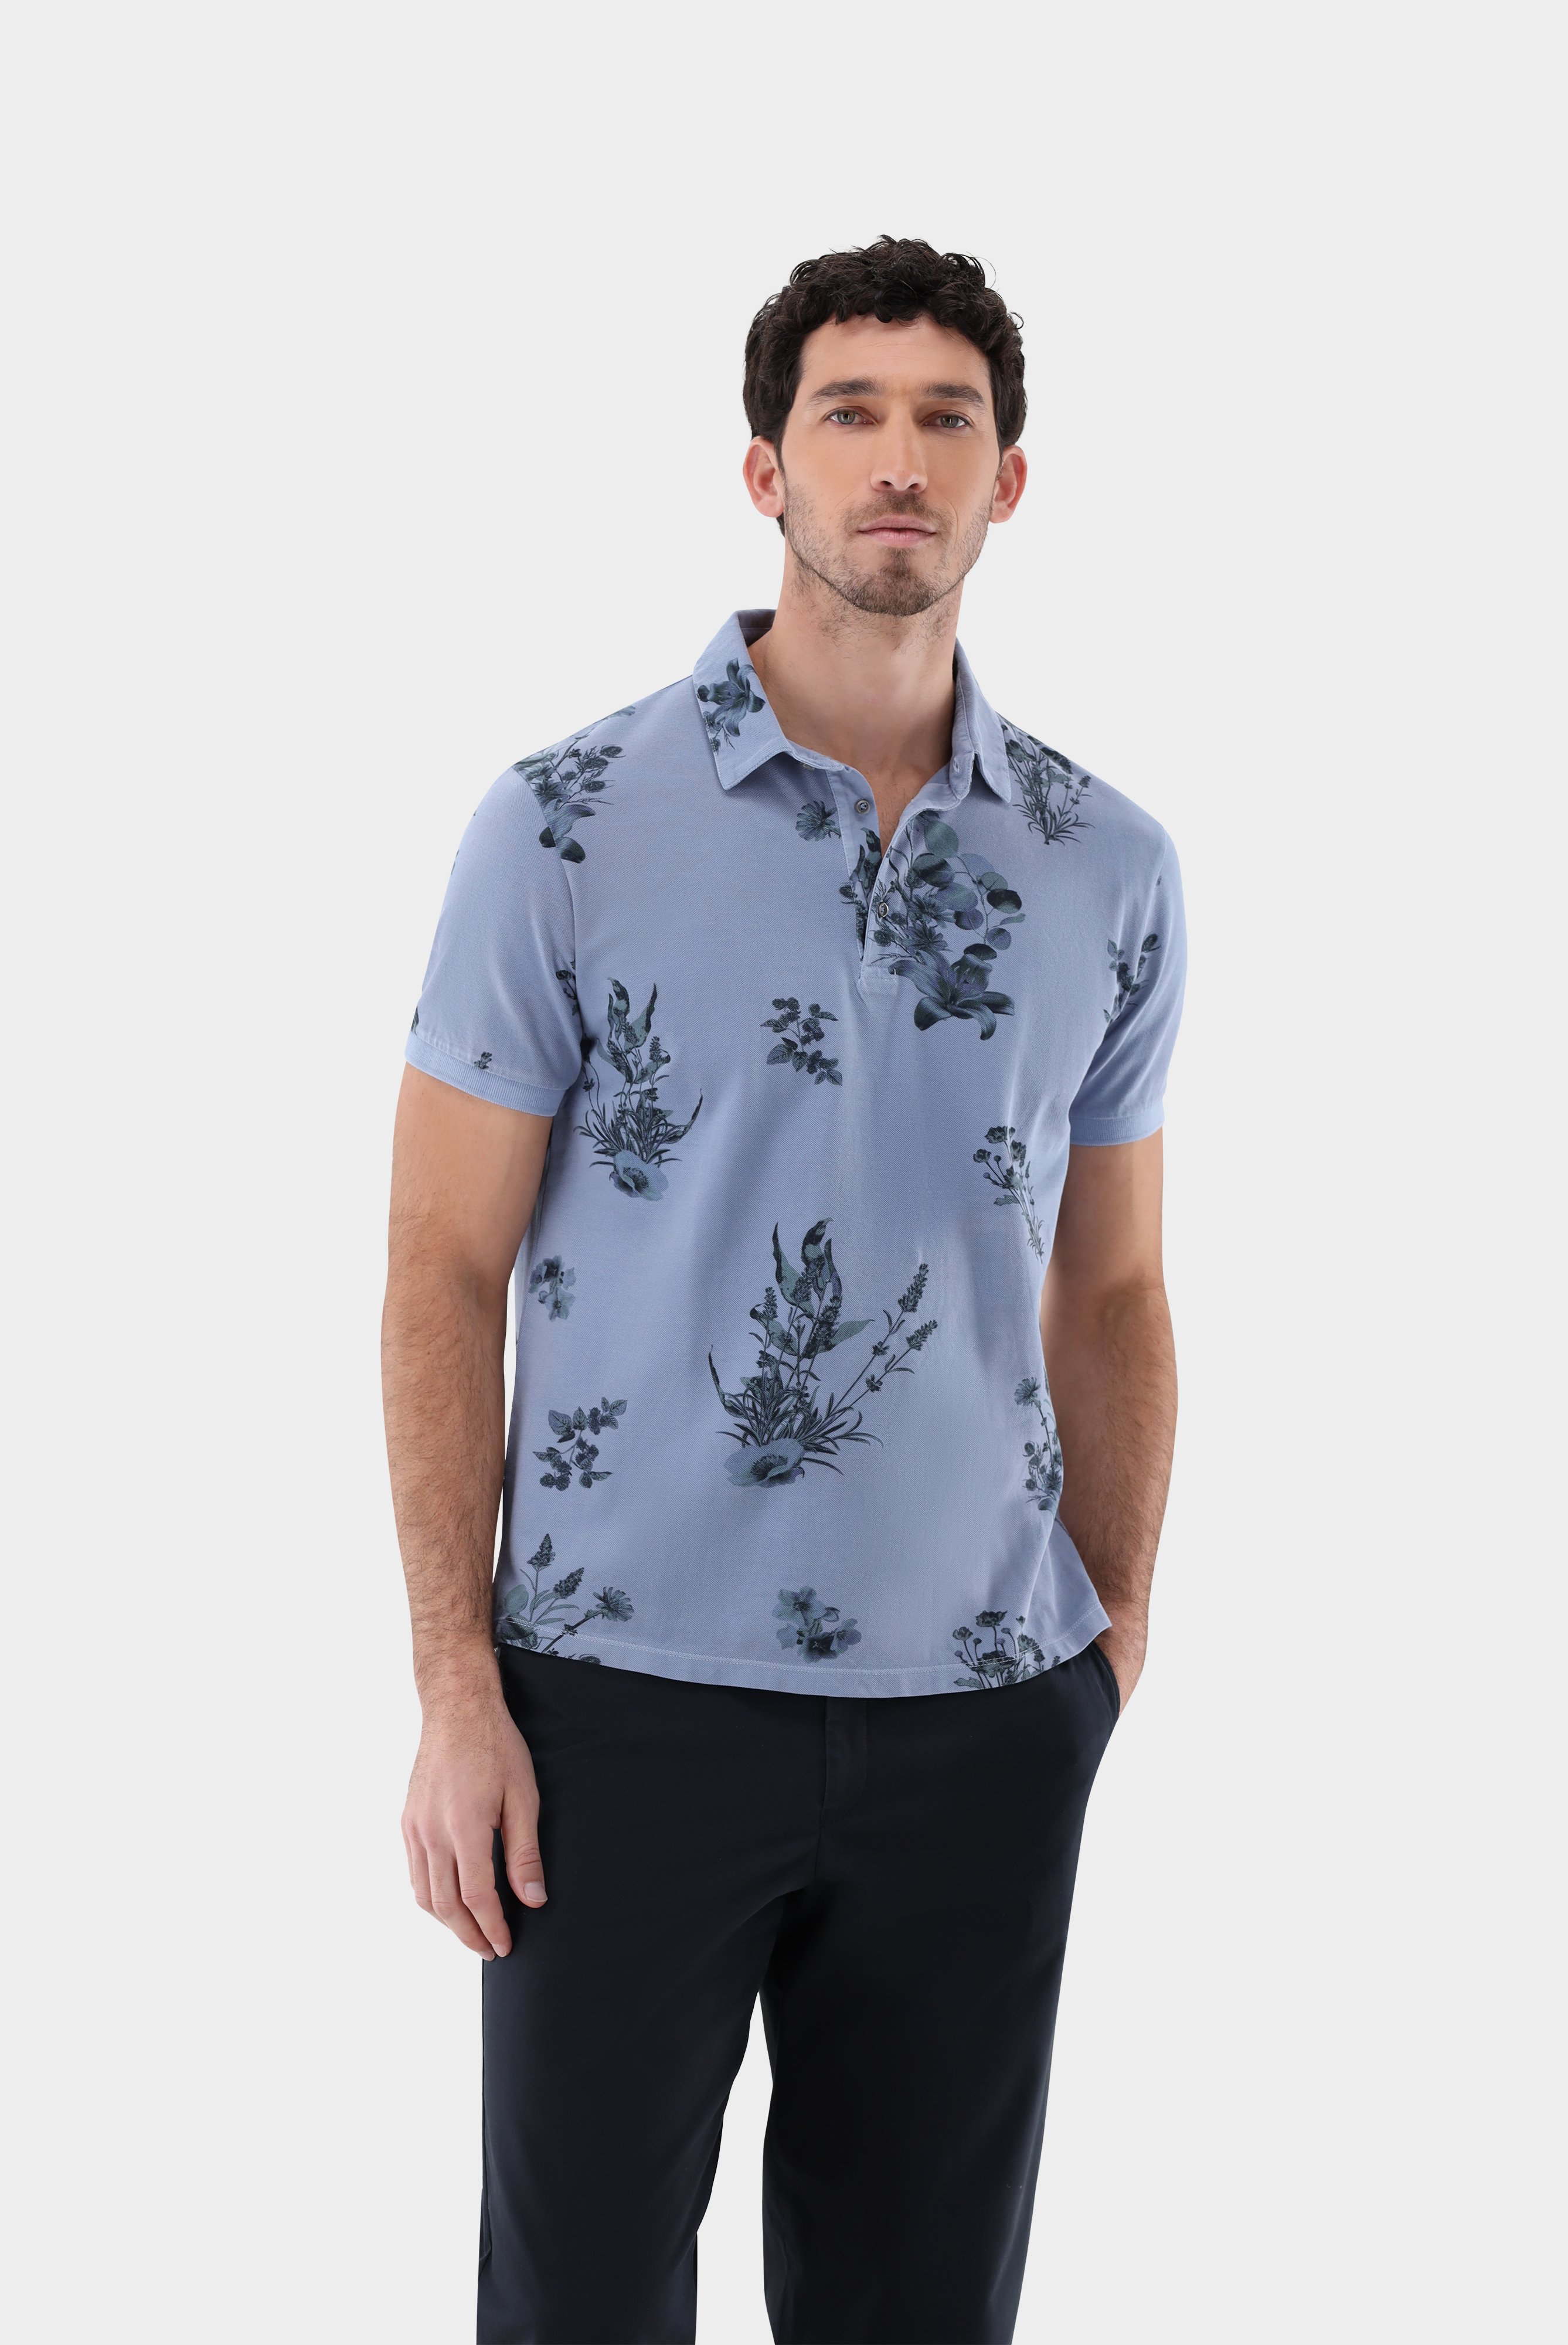 Poloshirts+Garment dyed Piquet Polo with Print+20.1650.SY.Z20047.760.S